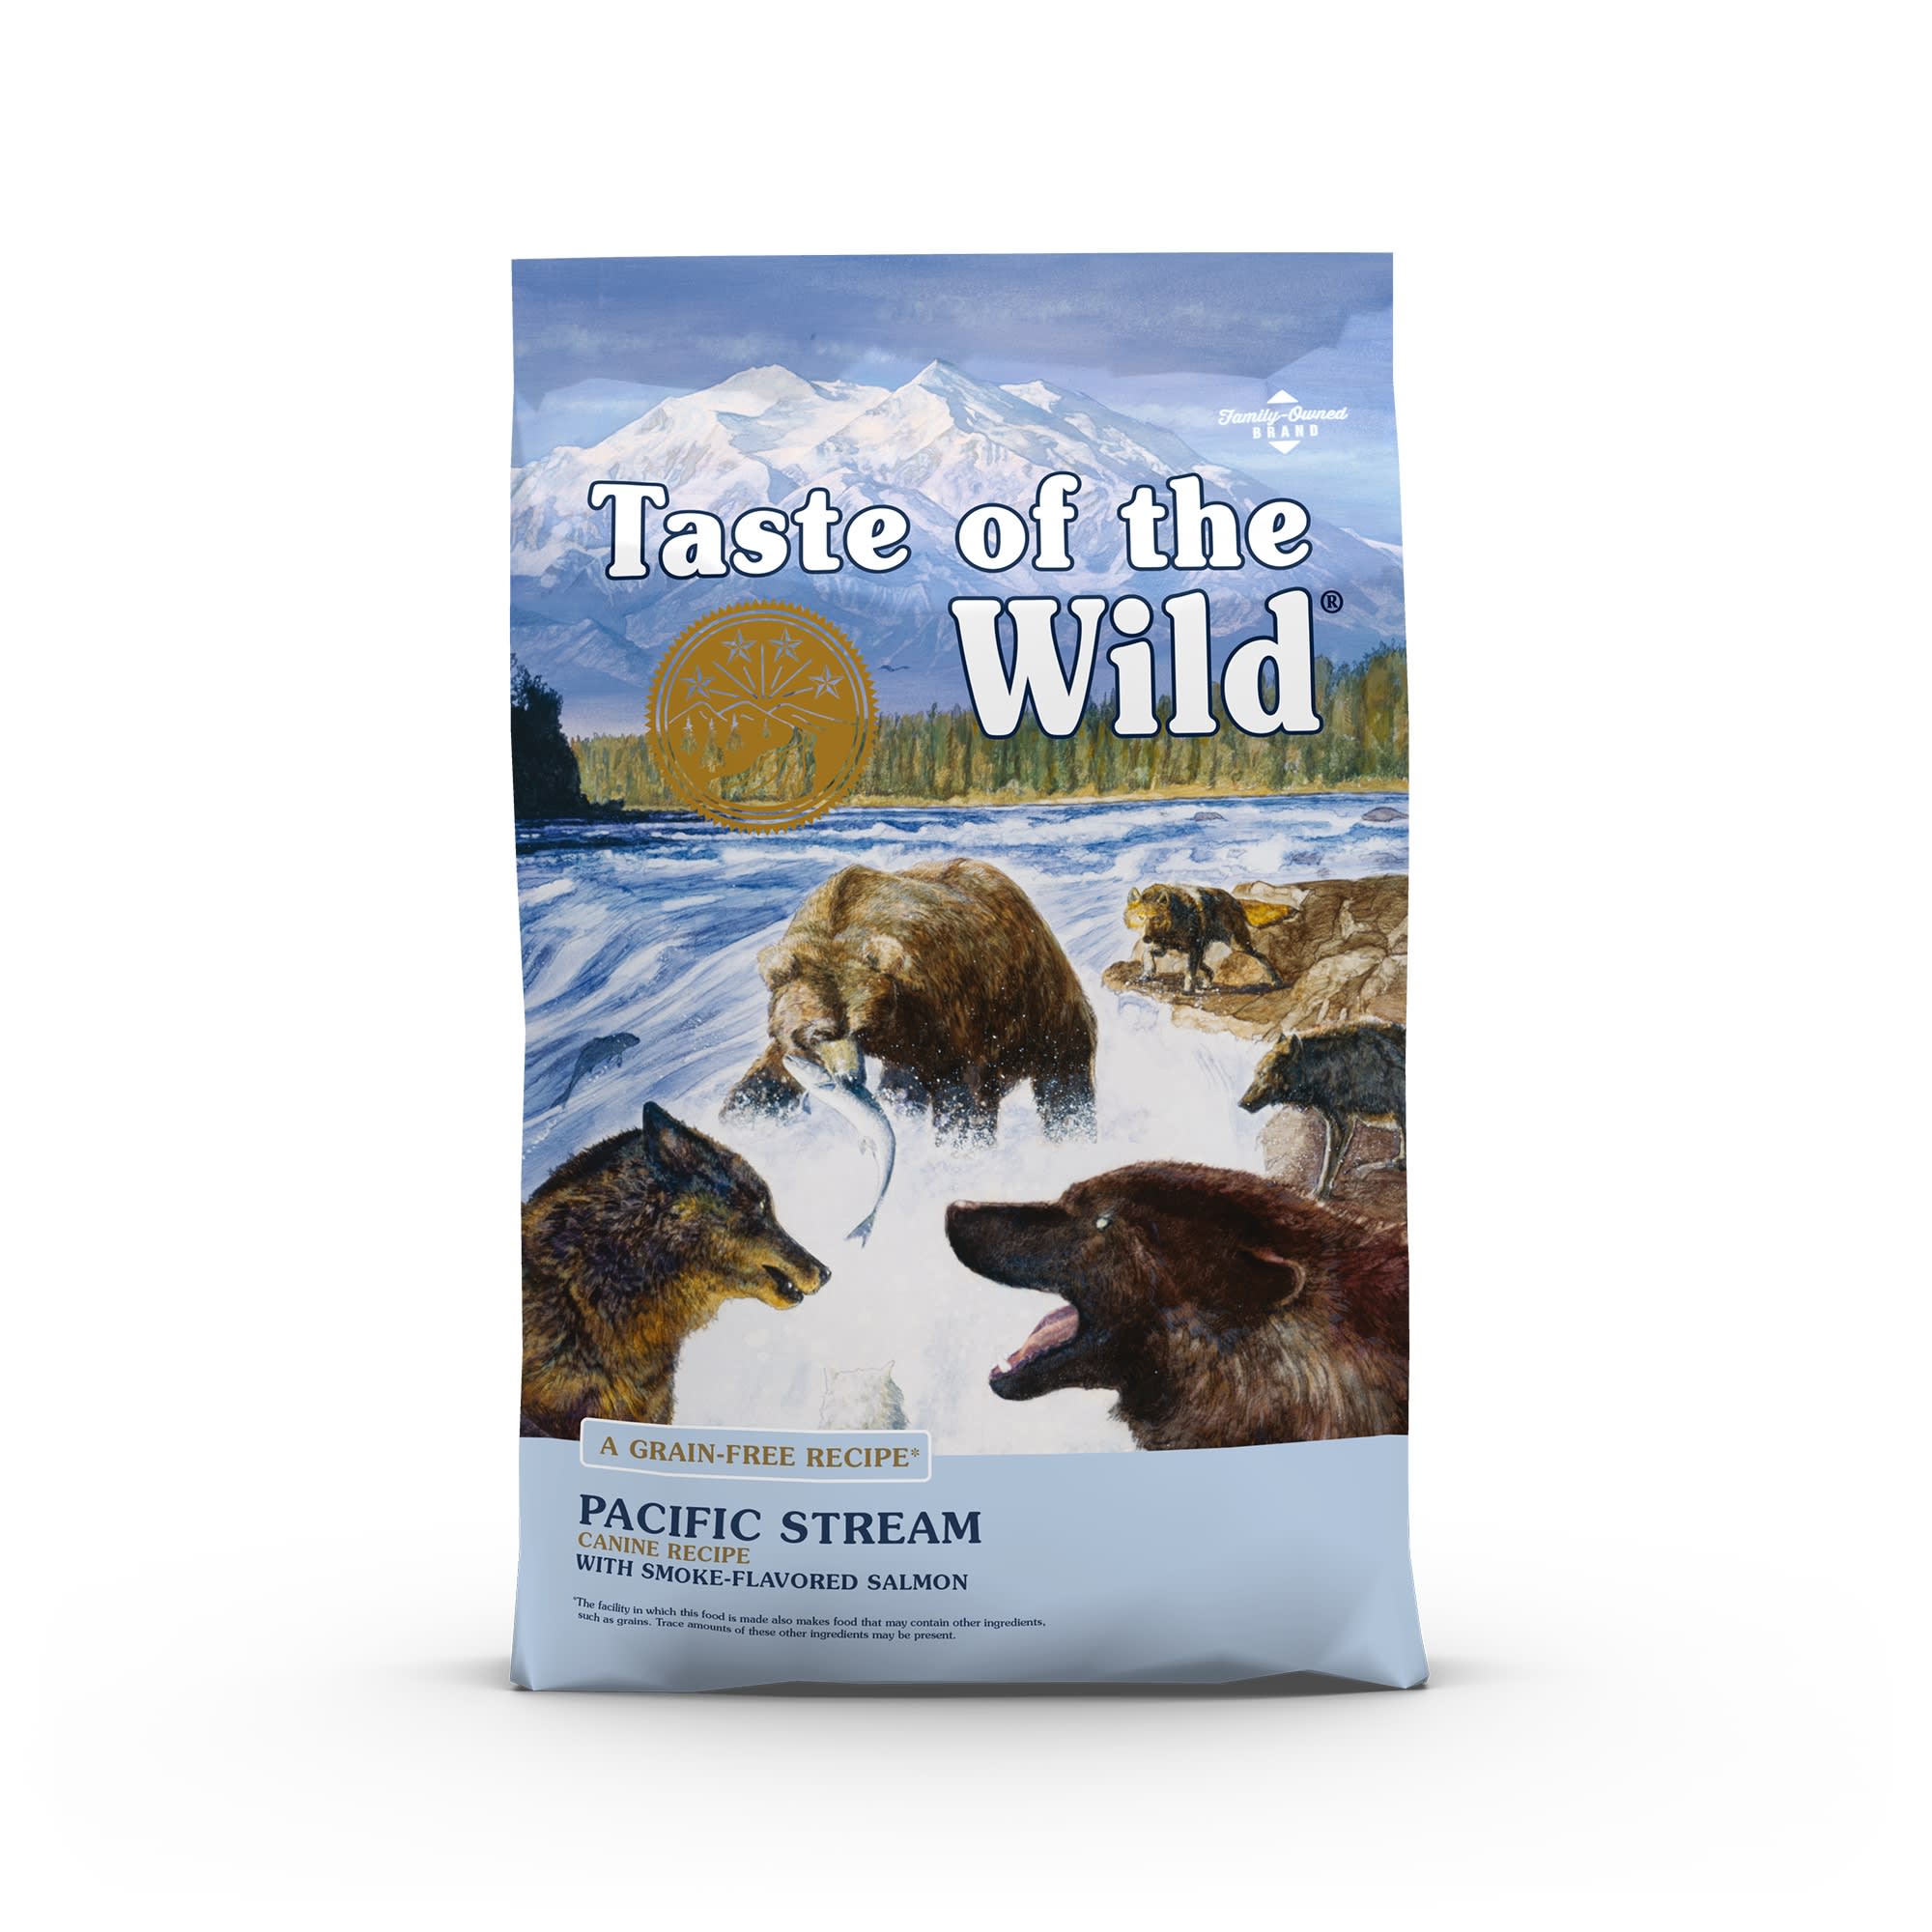 Taste of the Wild Pacific Stream Grain-Free with Smoke-Flavored Salmon Dry  Dog Food, 28 lbs. | Petco